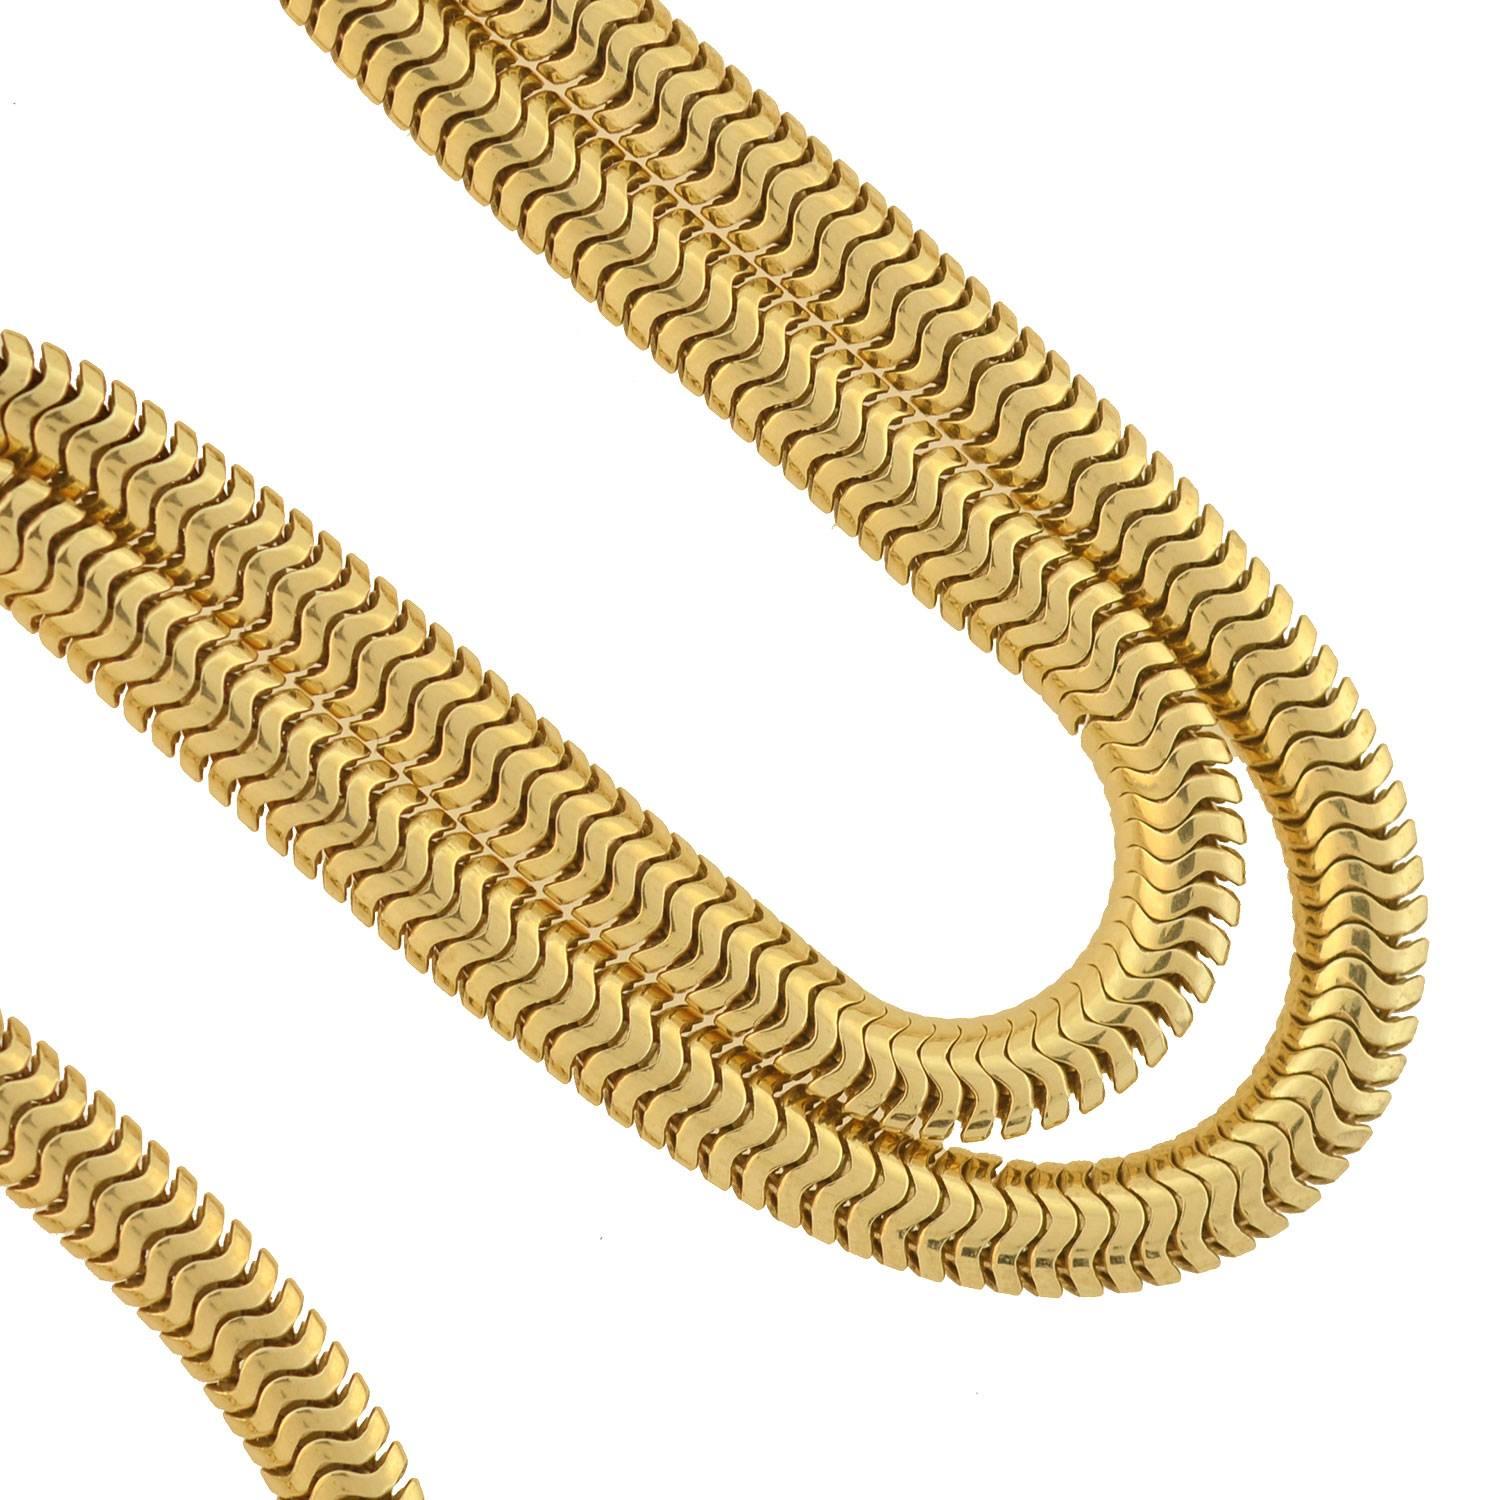 A very stylish chain necklace from the Retro (ca1940) era! This flexible snake chain has a sleek and simple design crafted in 14kt yellow gold. The chain has a fairly wide body and the subtle scaled design gives it the flexibility to curve along the